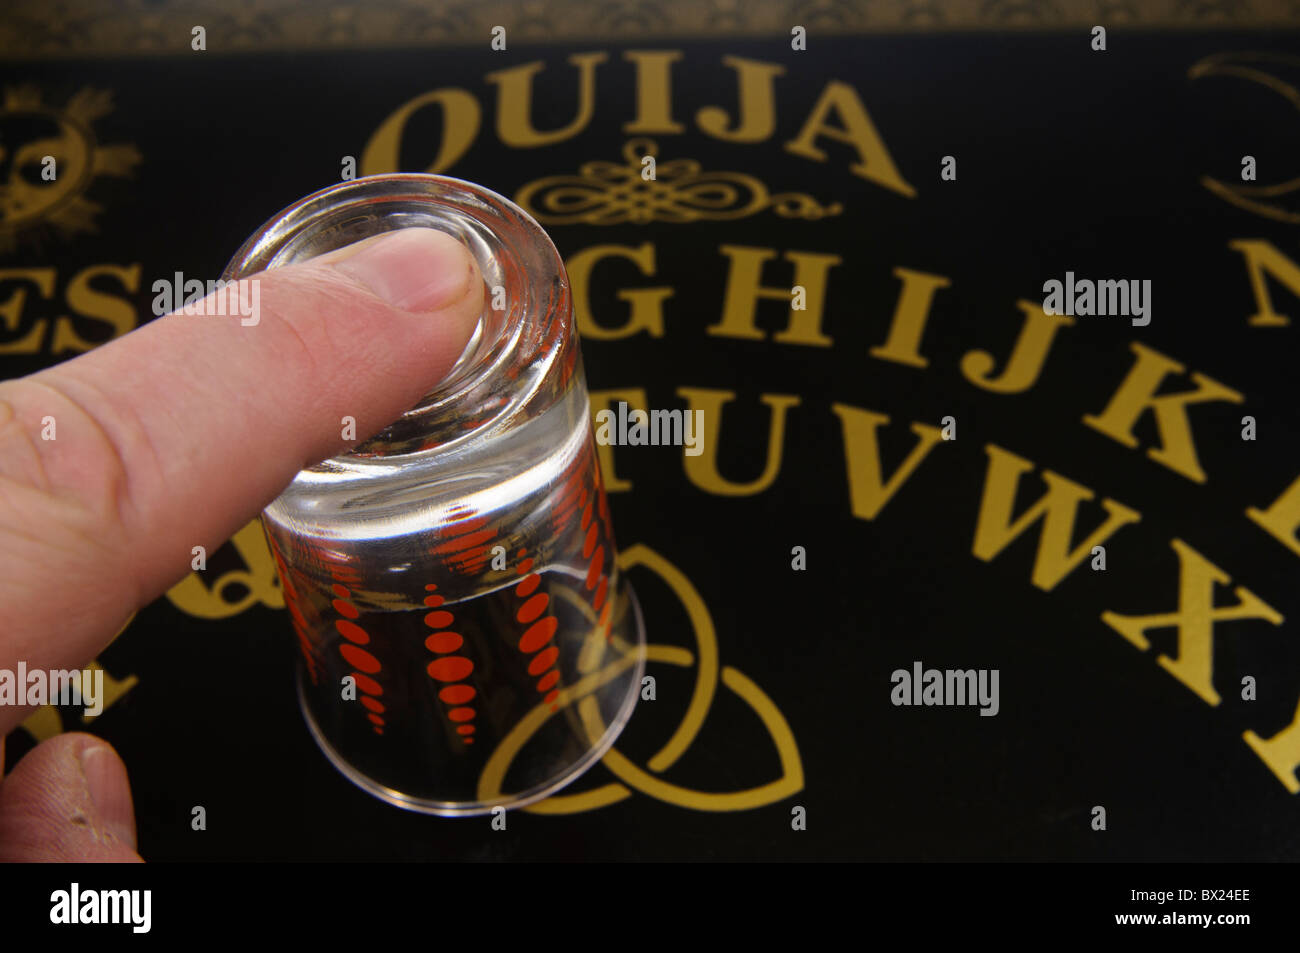 Finger on top of a glass on a generic Ouija board Stock Photo